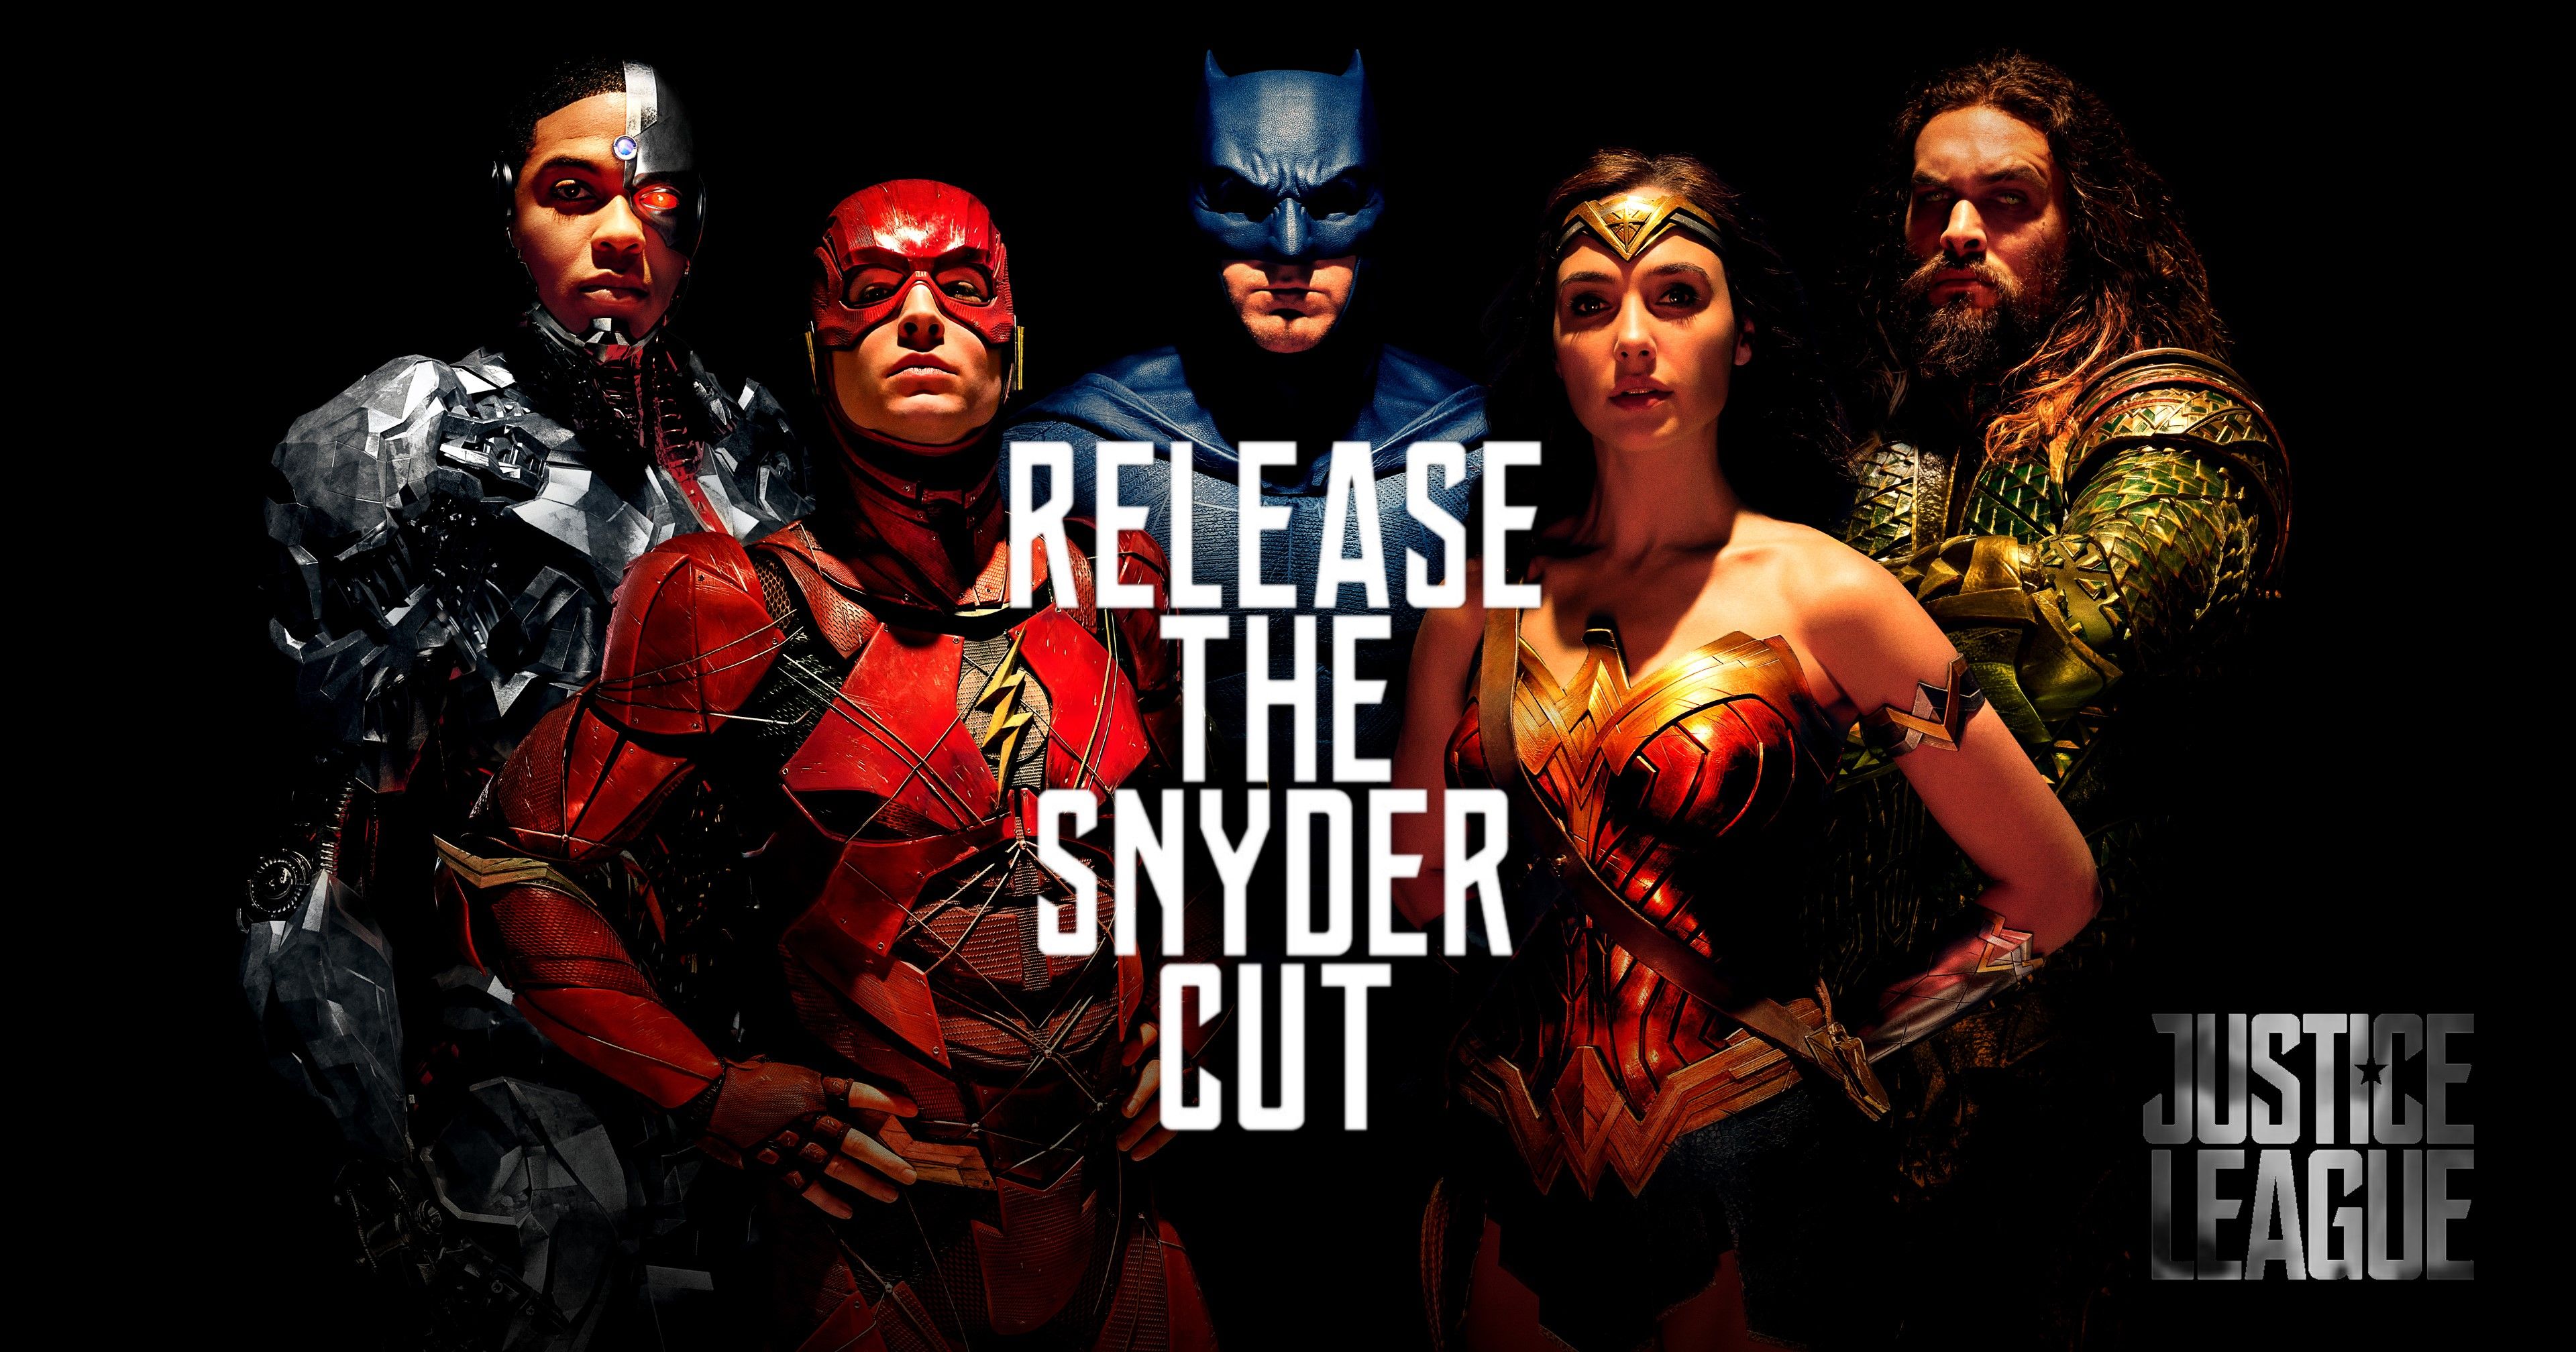 Justice League. The #ReleaseTheSnyderCut Campaign Gains Momentum of the Force